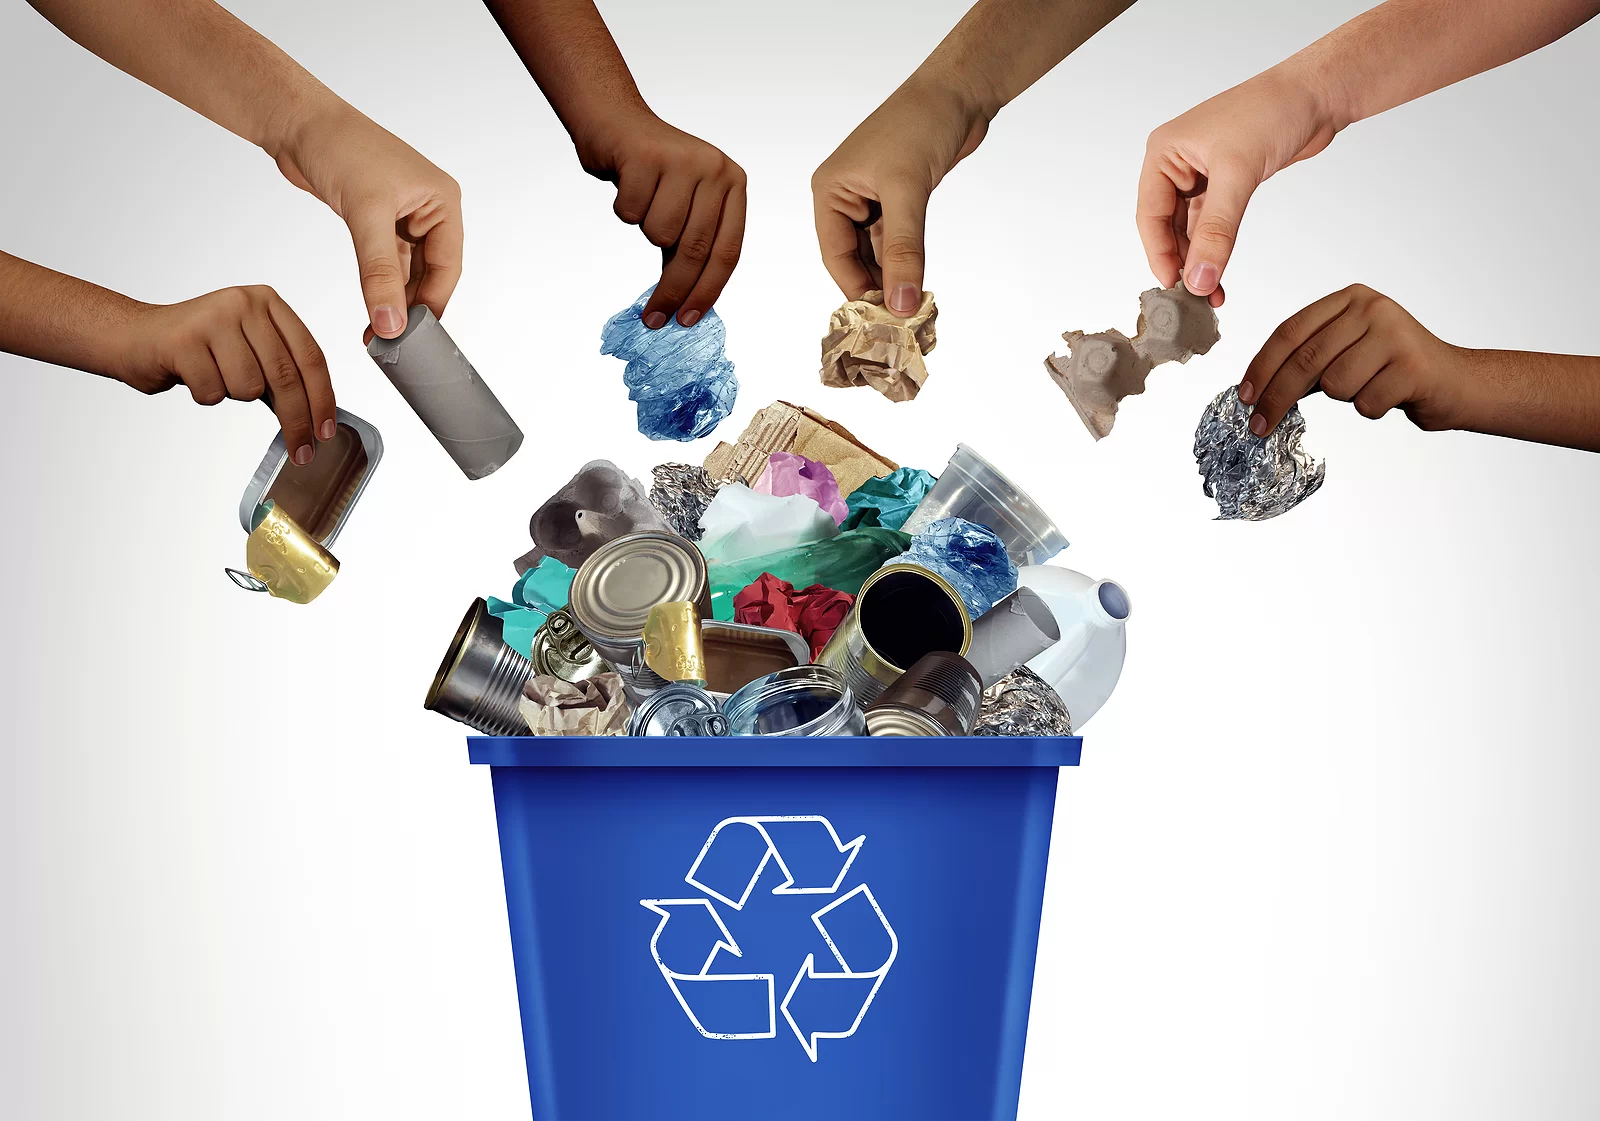 Community Recycling As A Blue Recycling Bin To Recycle Waste And